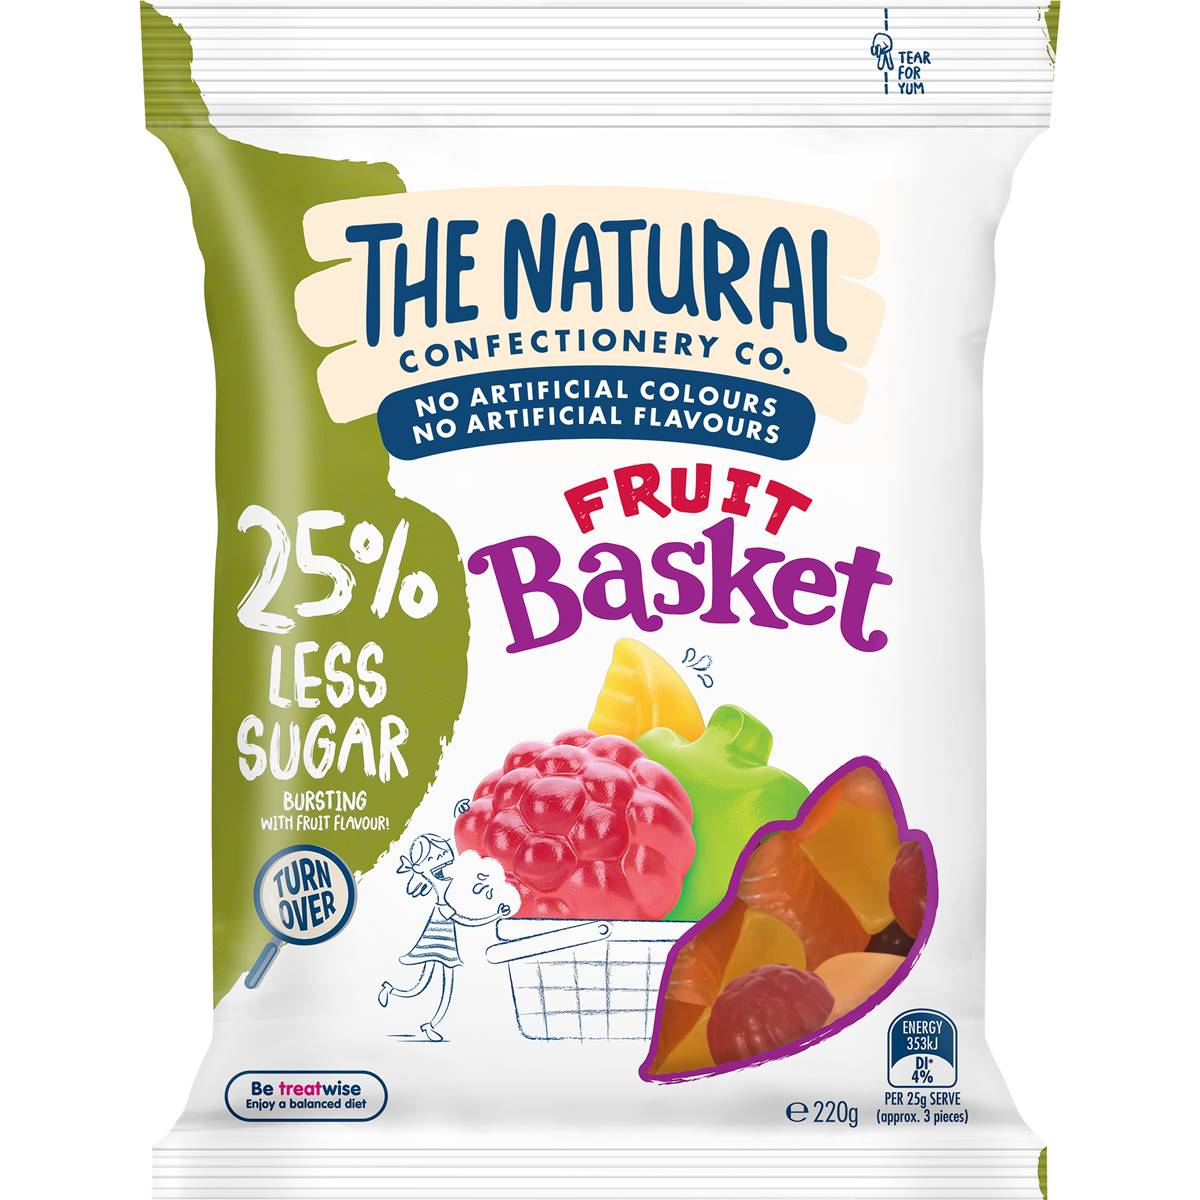 Calories in The Natural Confectionery Co. Fruit Basket Reduced Sugar Lollies